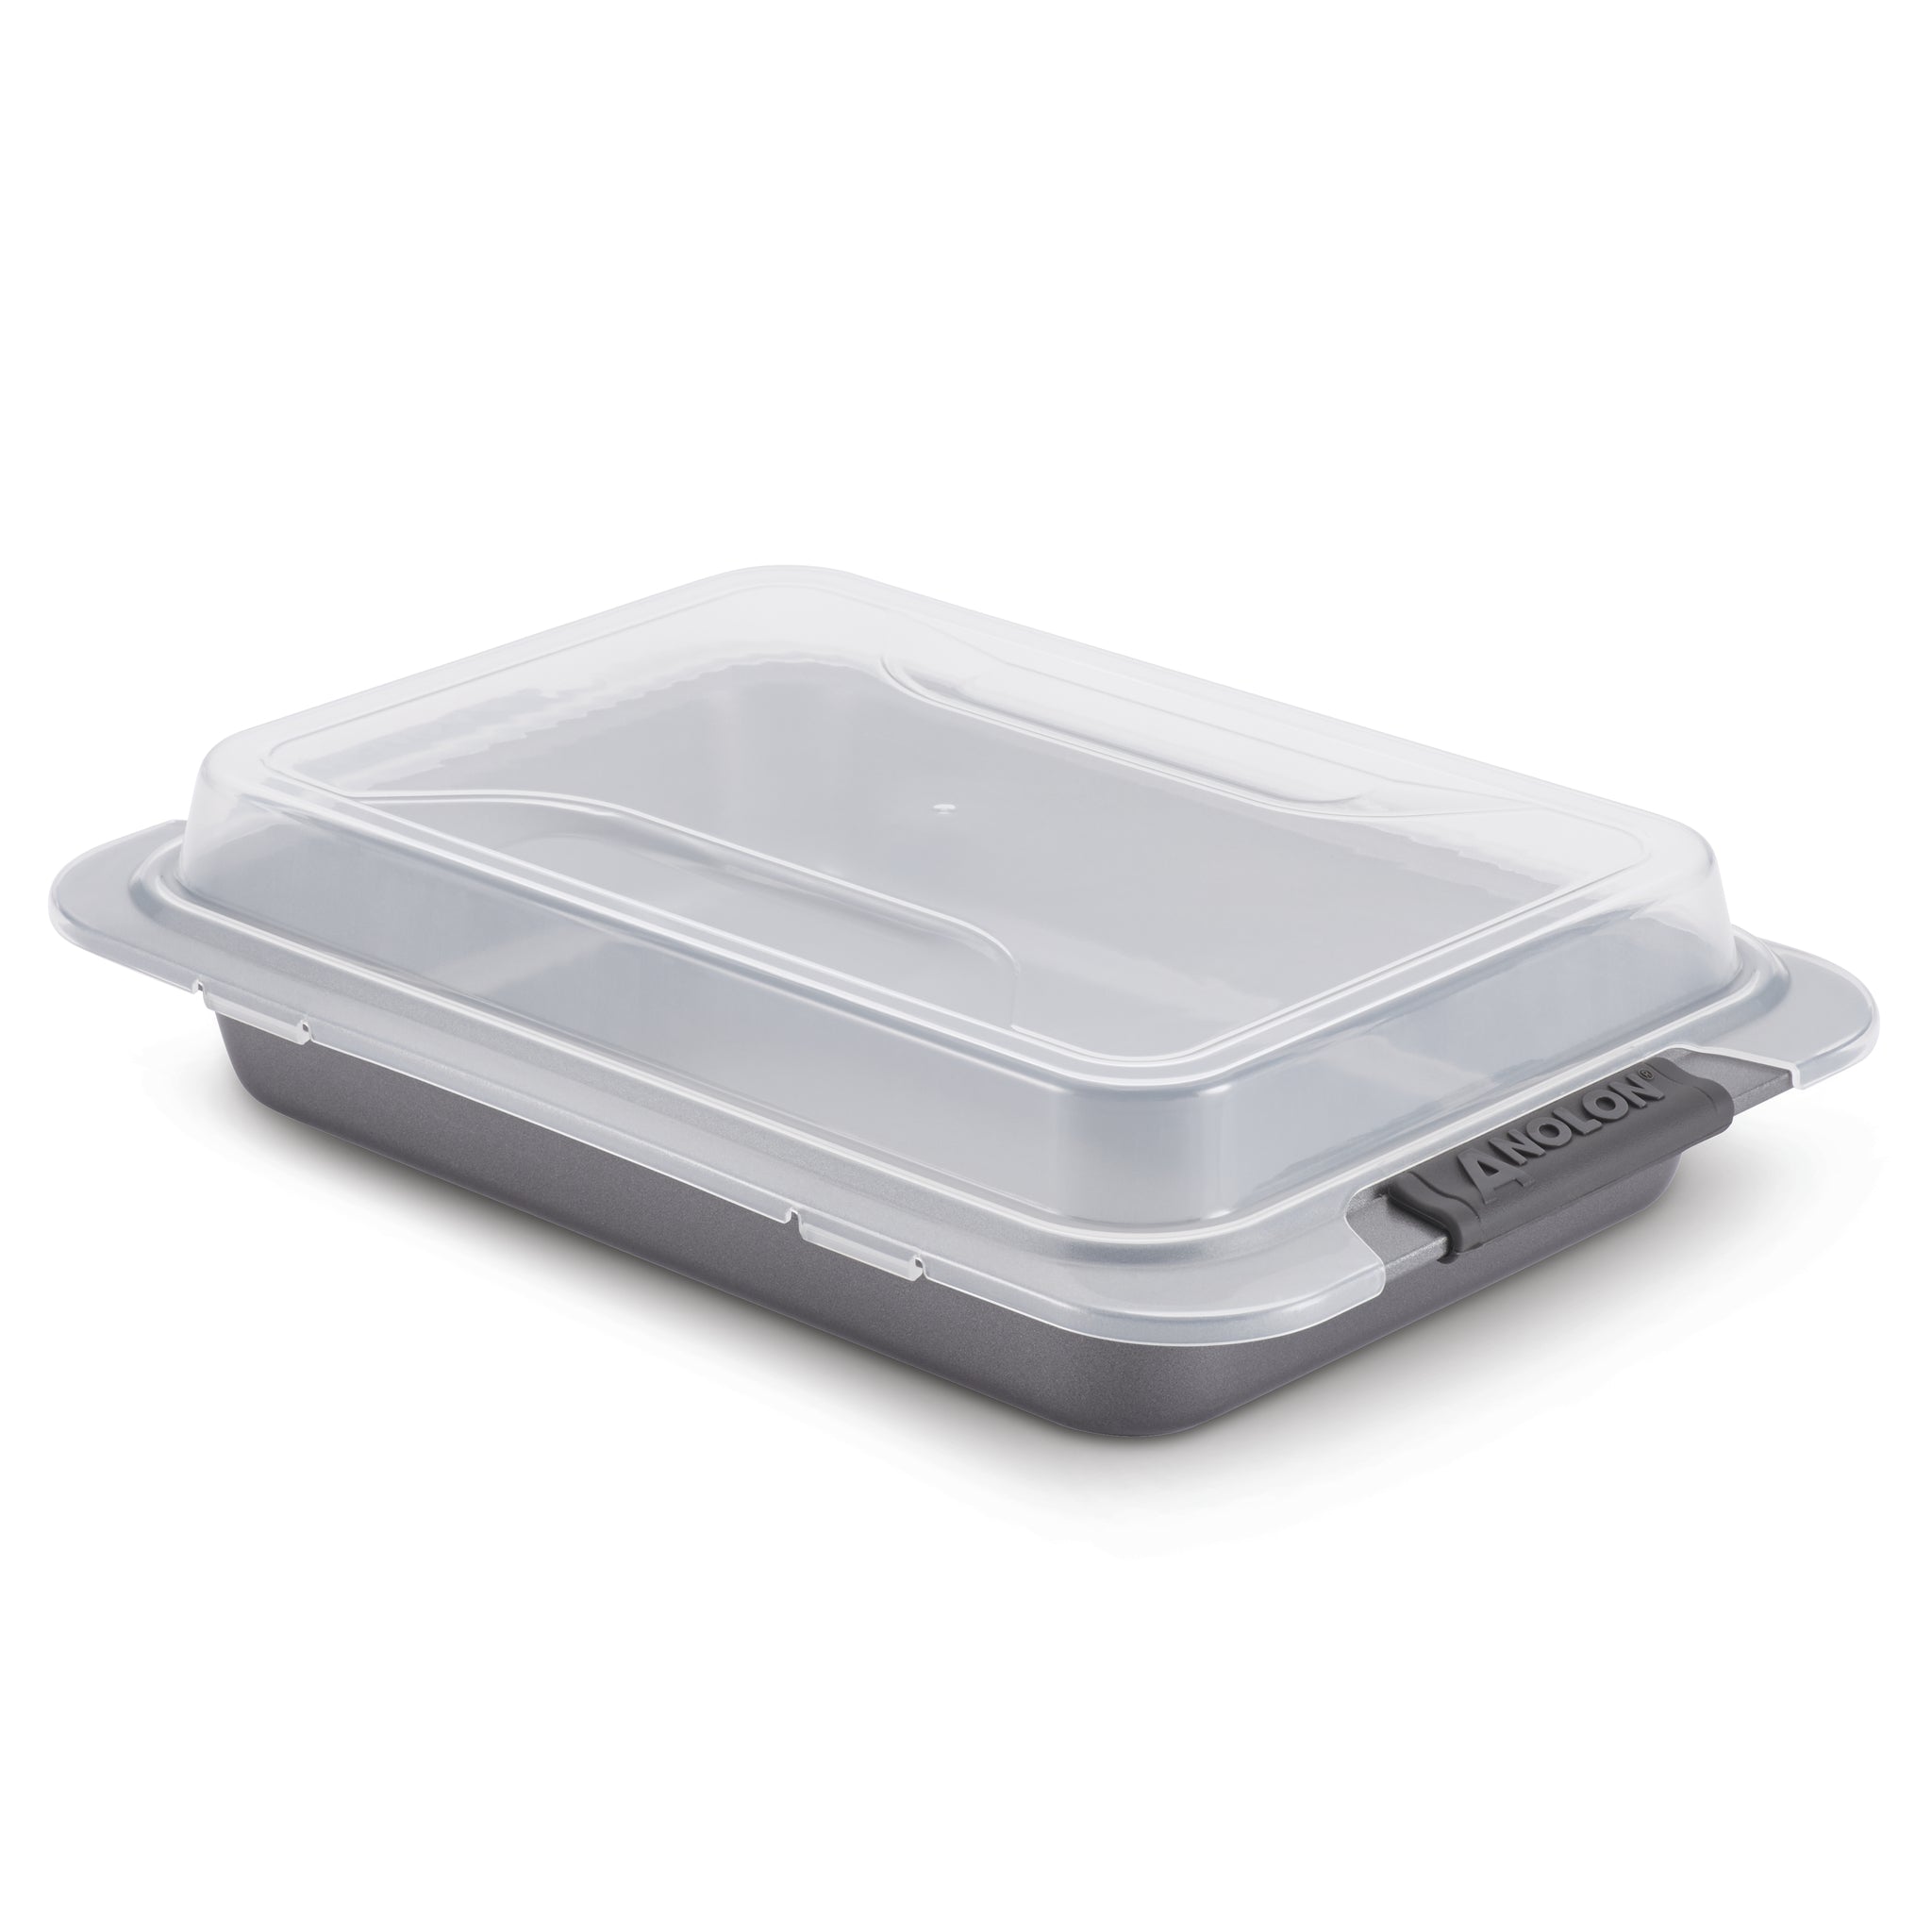 9 Inch x 13 Inch Pan and Lid Set